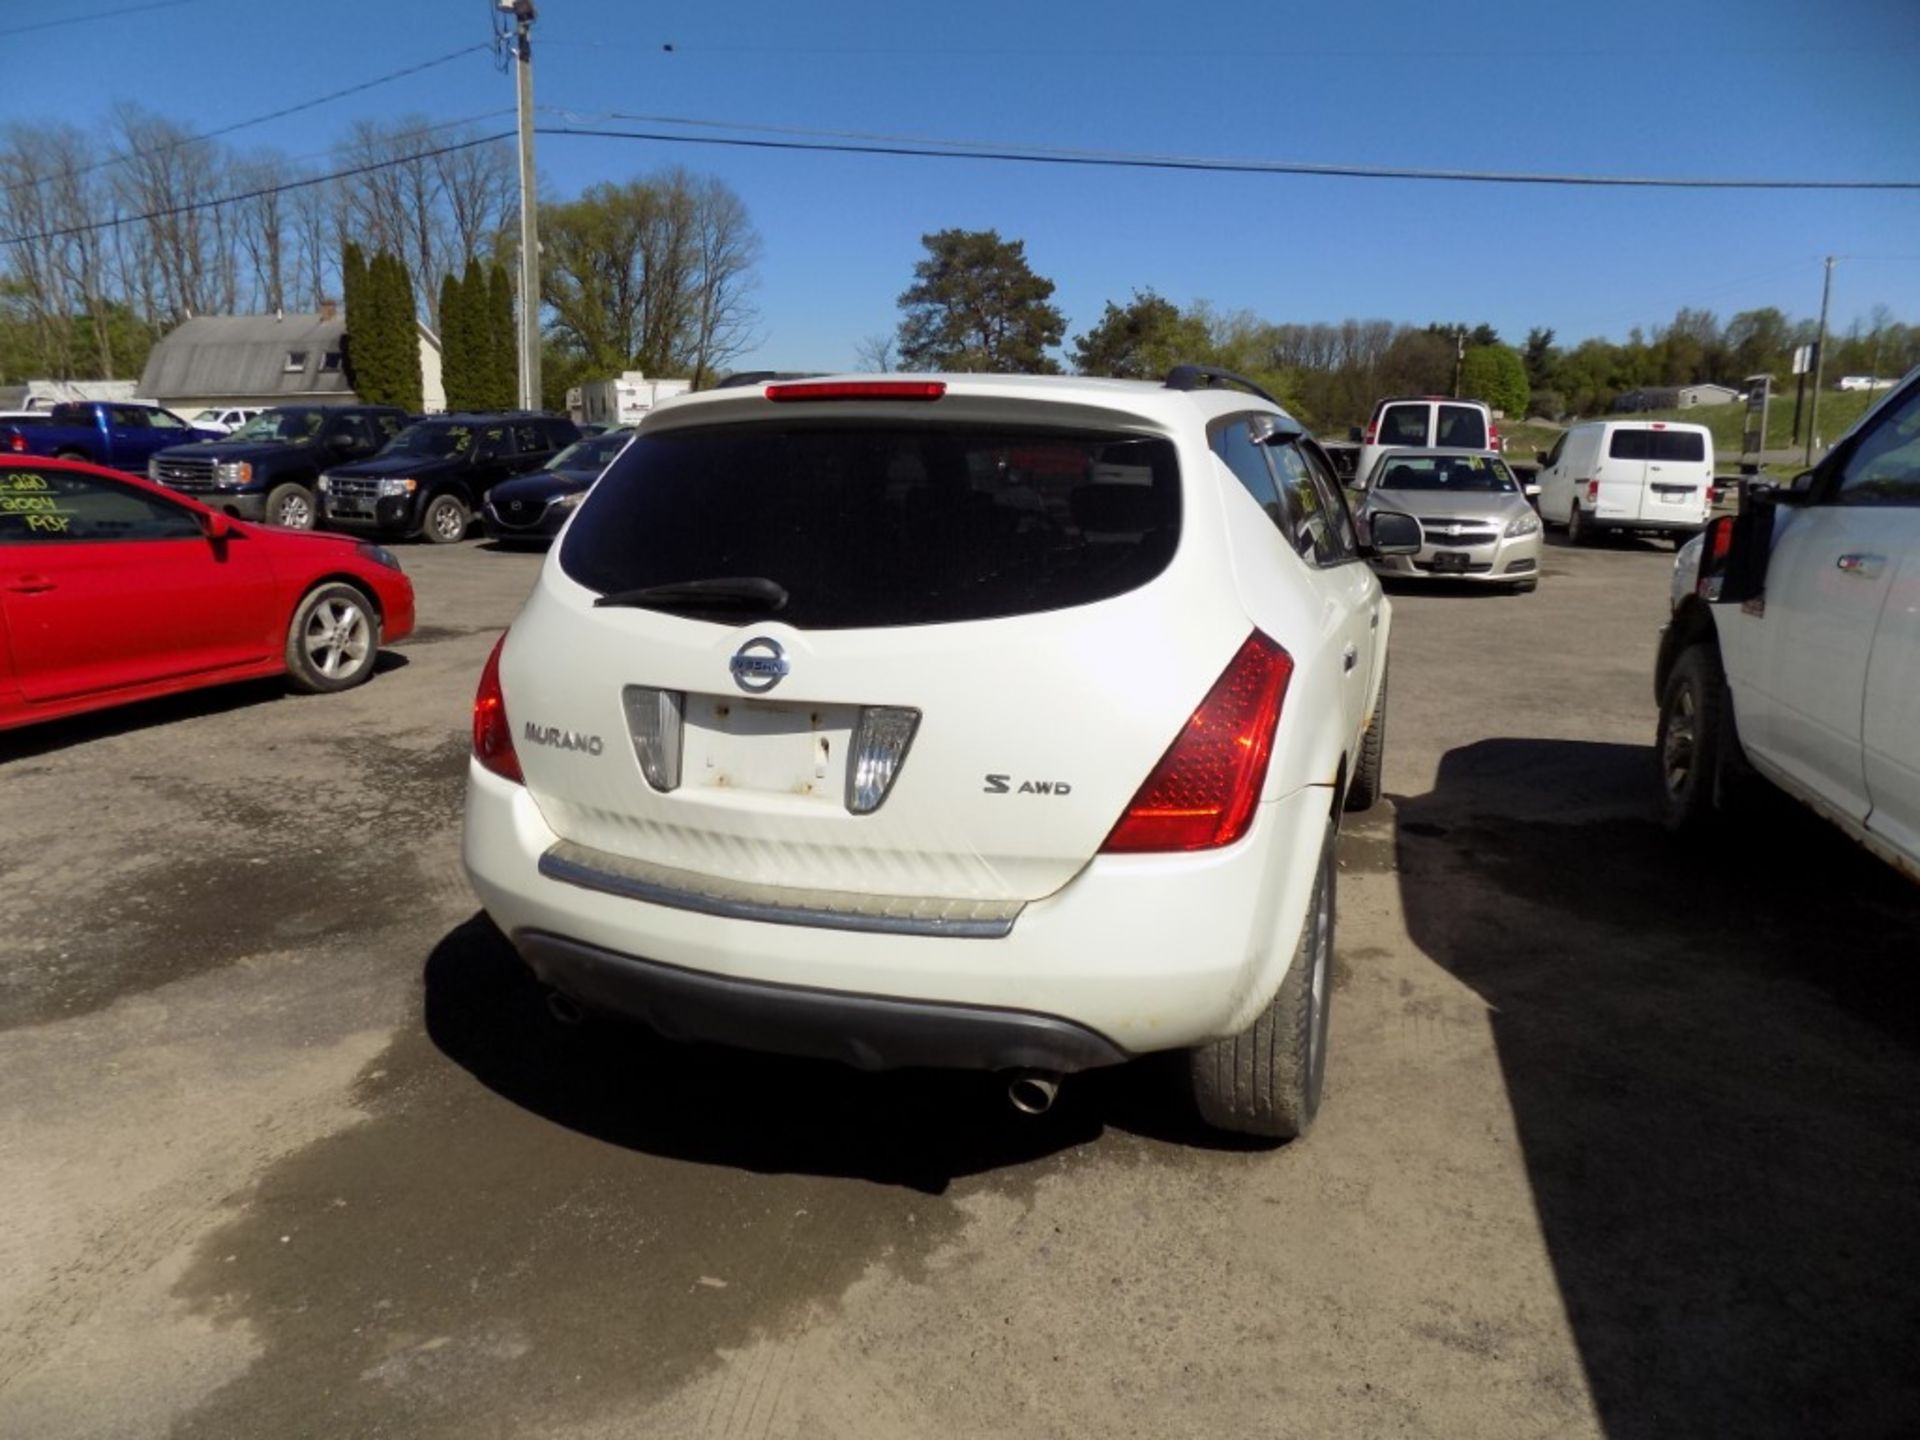 2007 Nissan Murano S AWD, White, 141,063, Vin# JN8AZ08WX7W643230 - OPEN TO ALL BUYERS, - Image 3 of 4